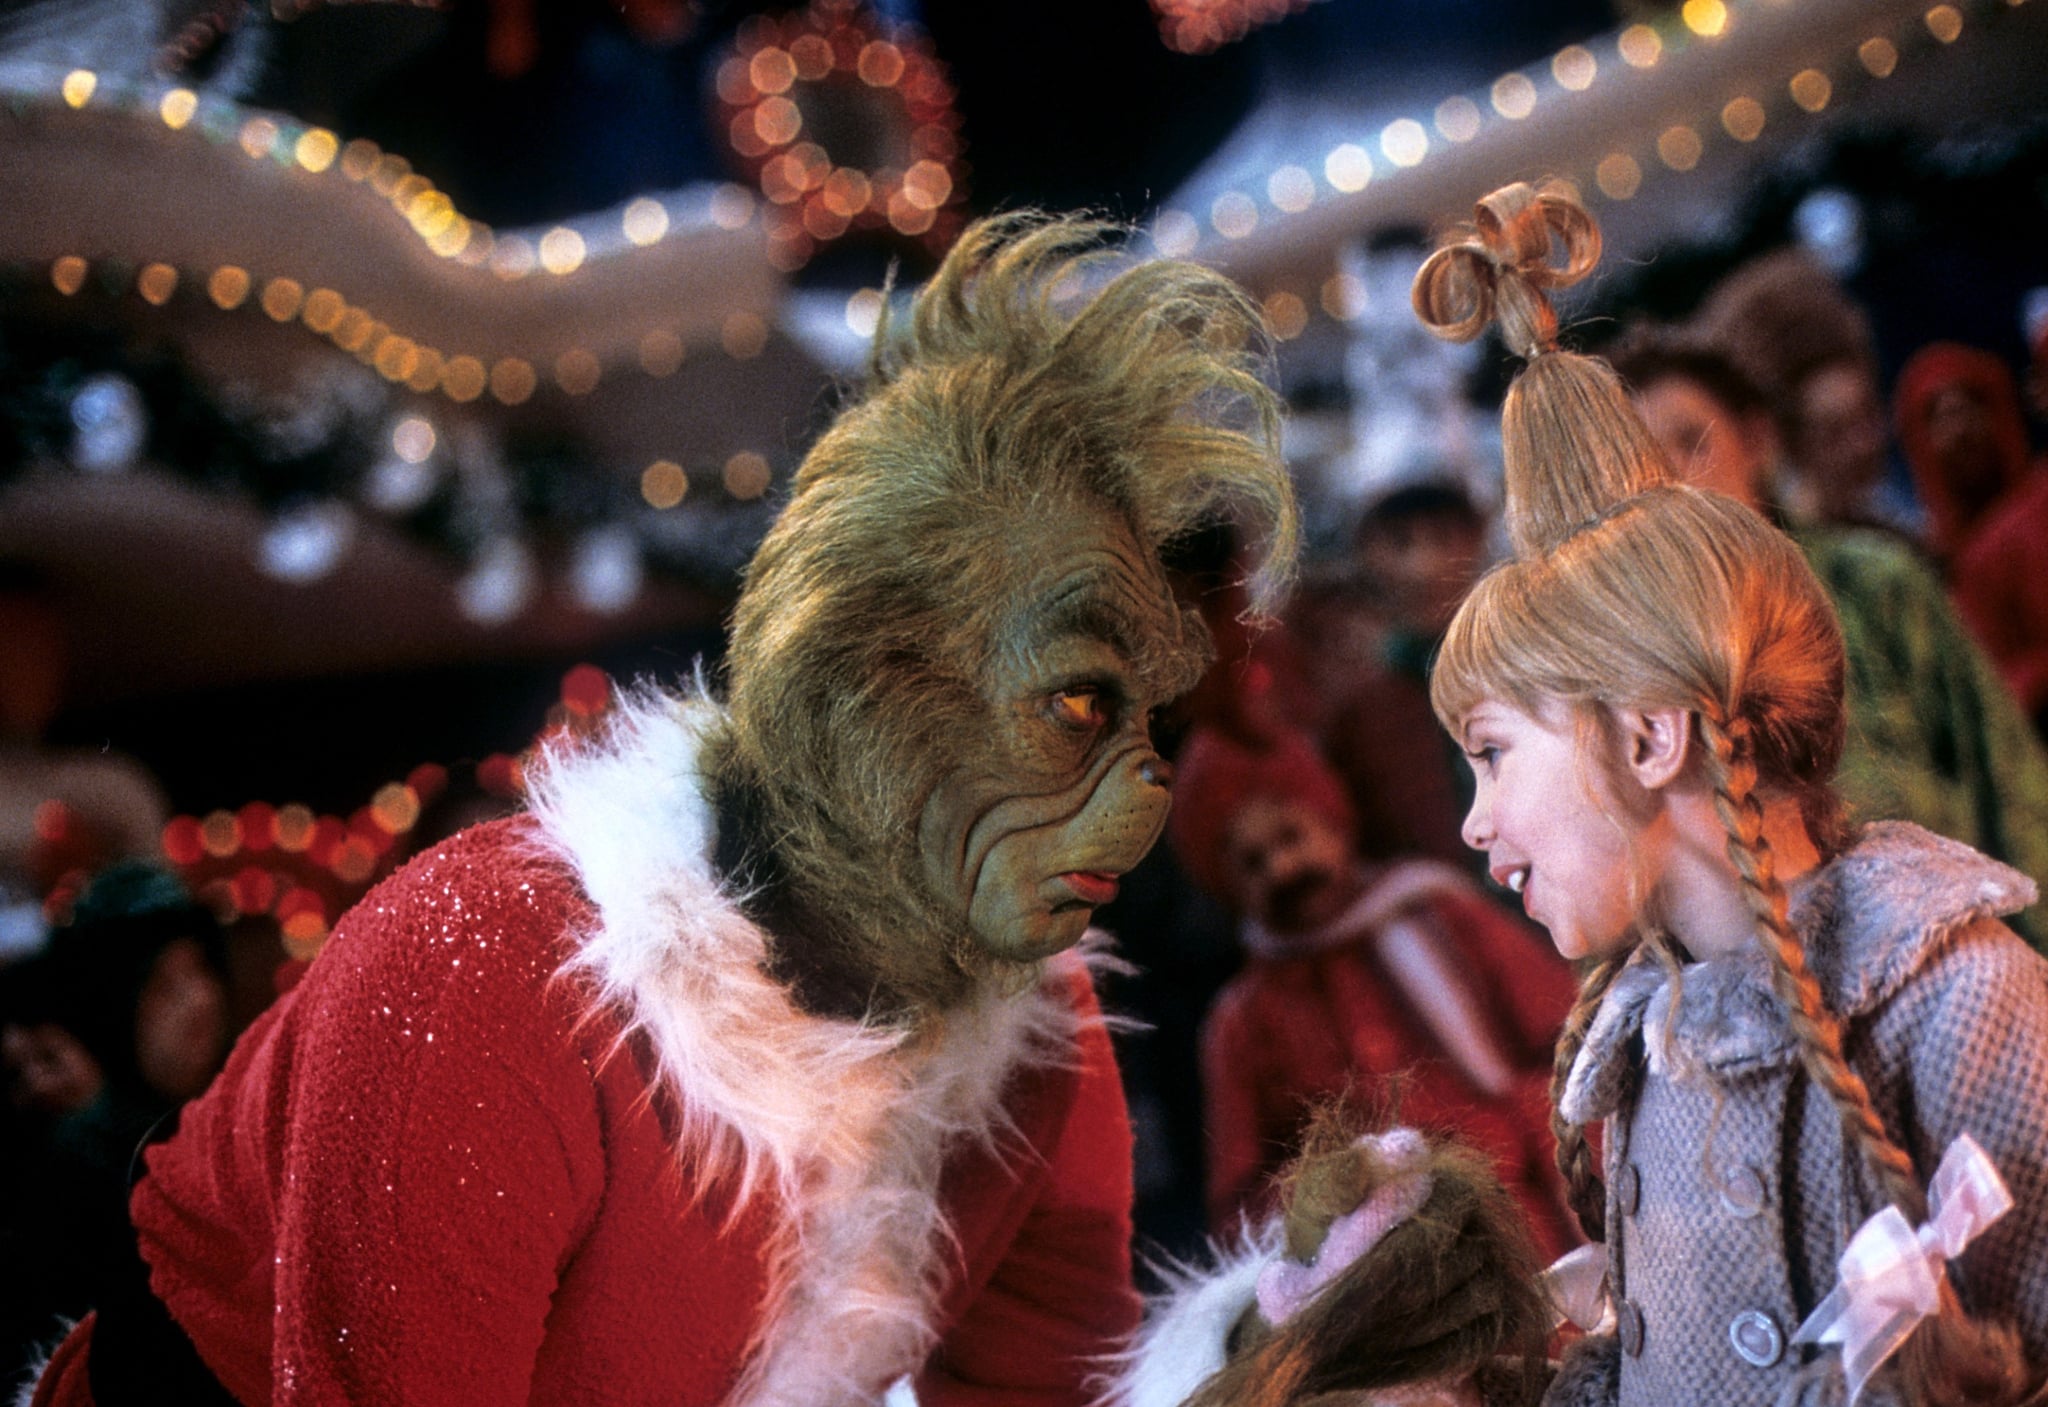 Dr. Seuss’s Grinch Gets a Bloody Makeover in New Horror Film “The Mean One”